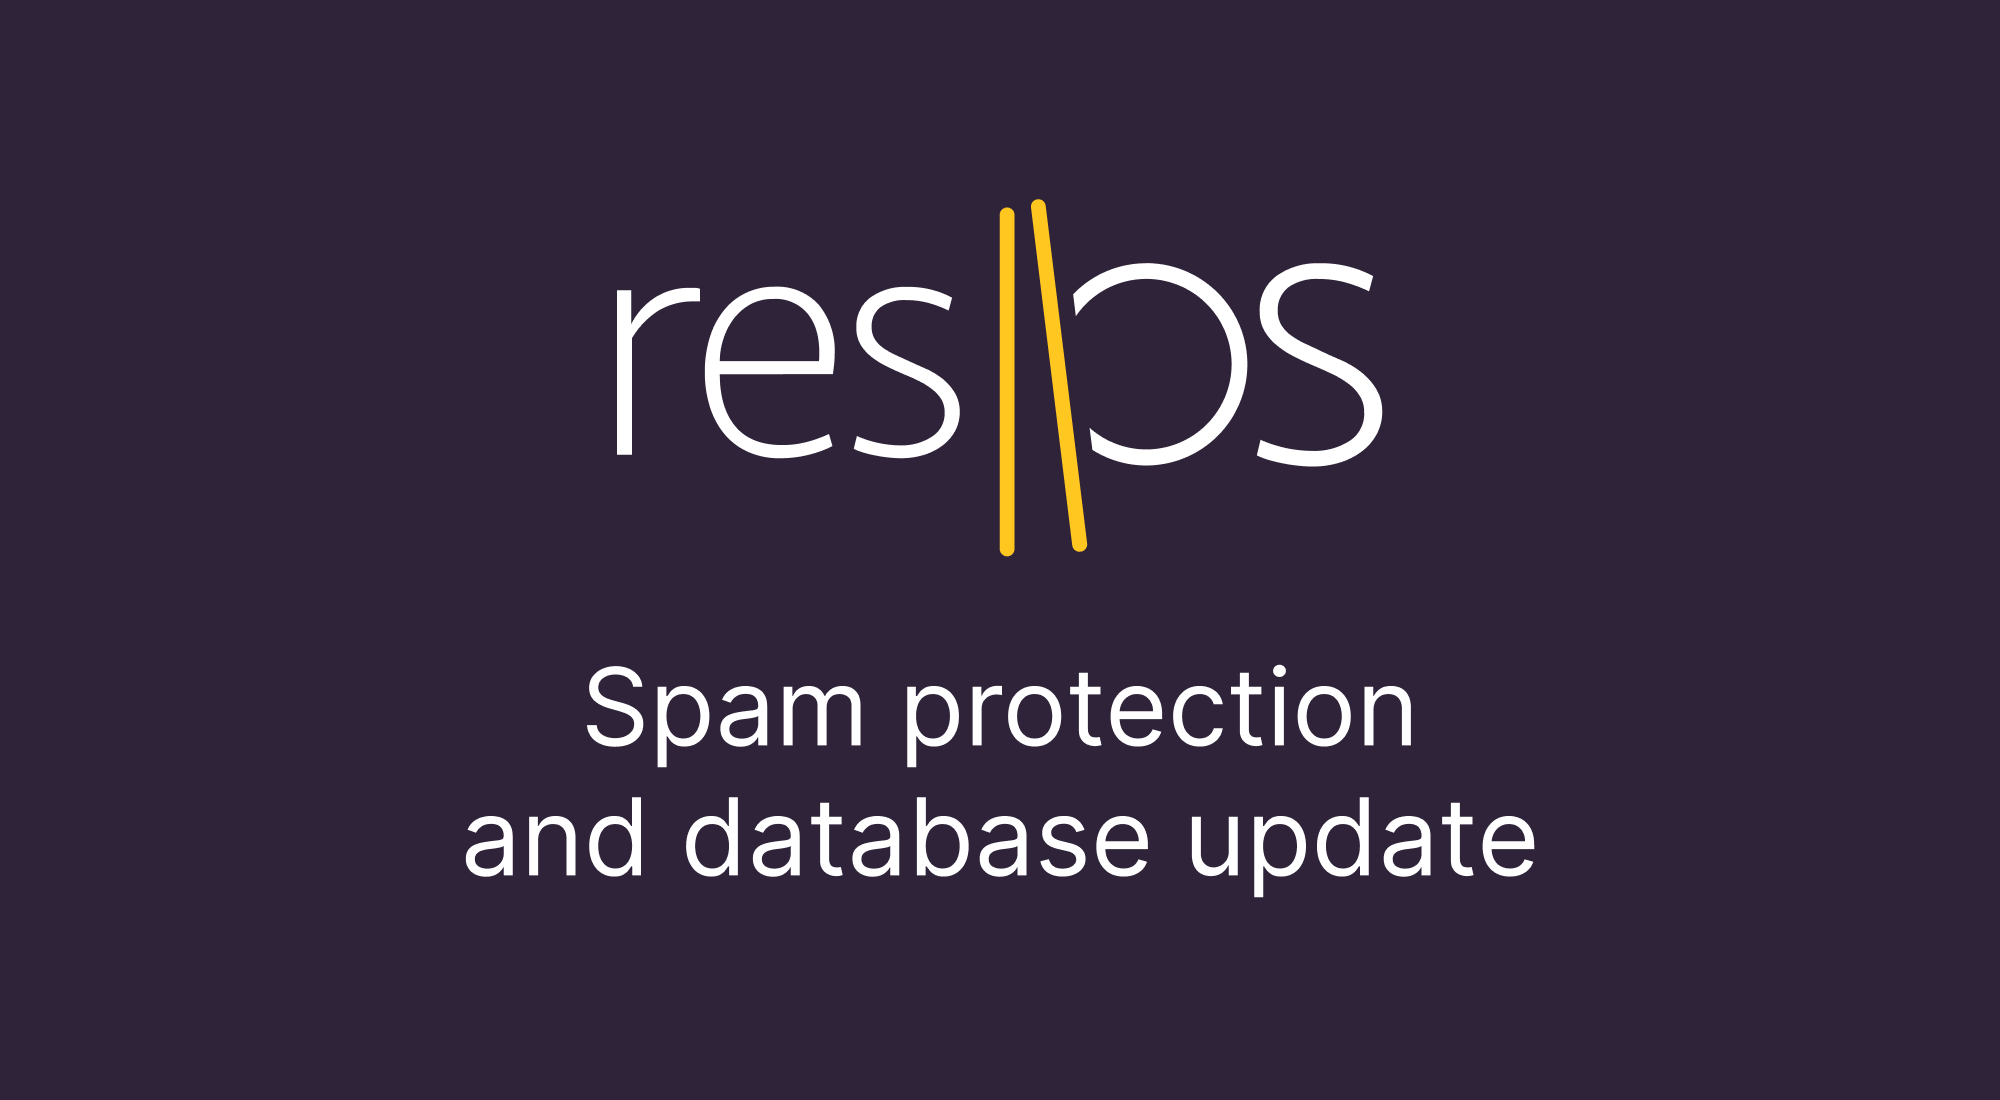 Spam protection and database update